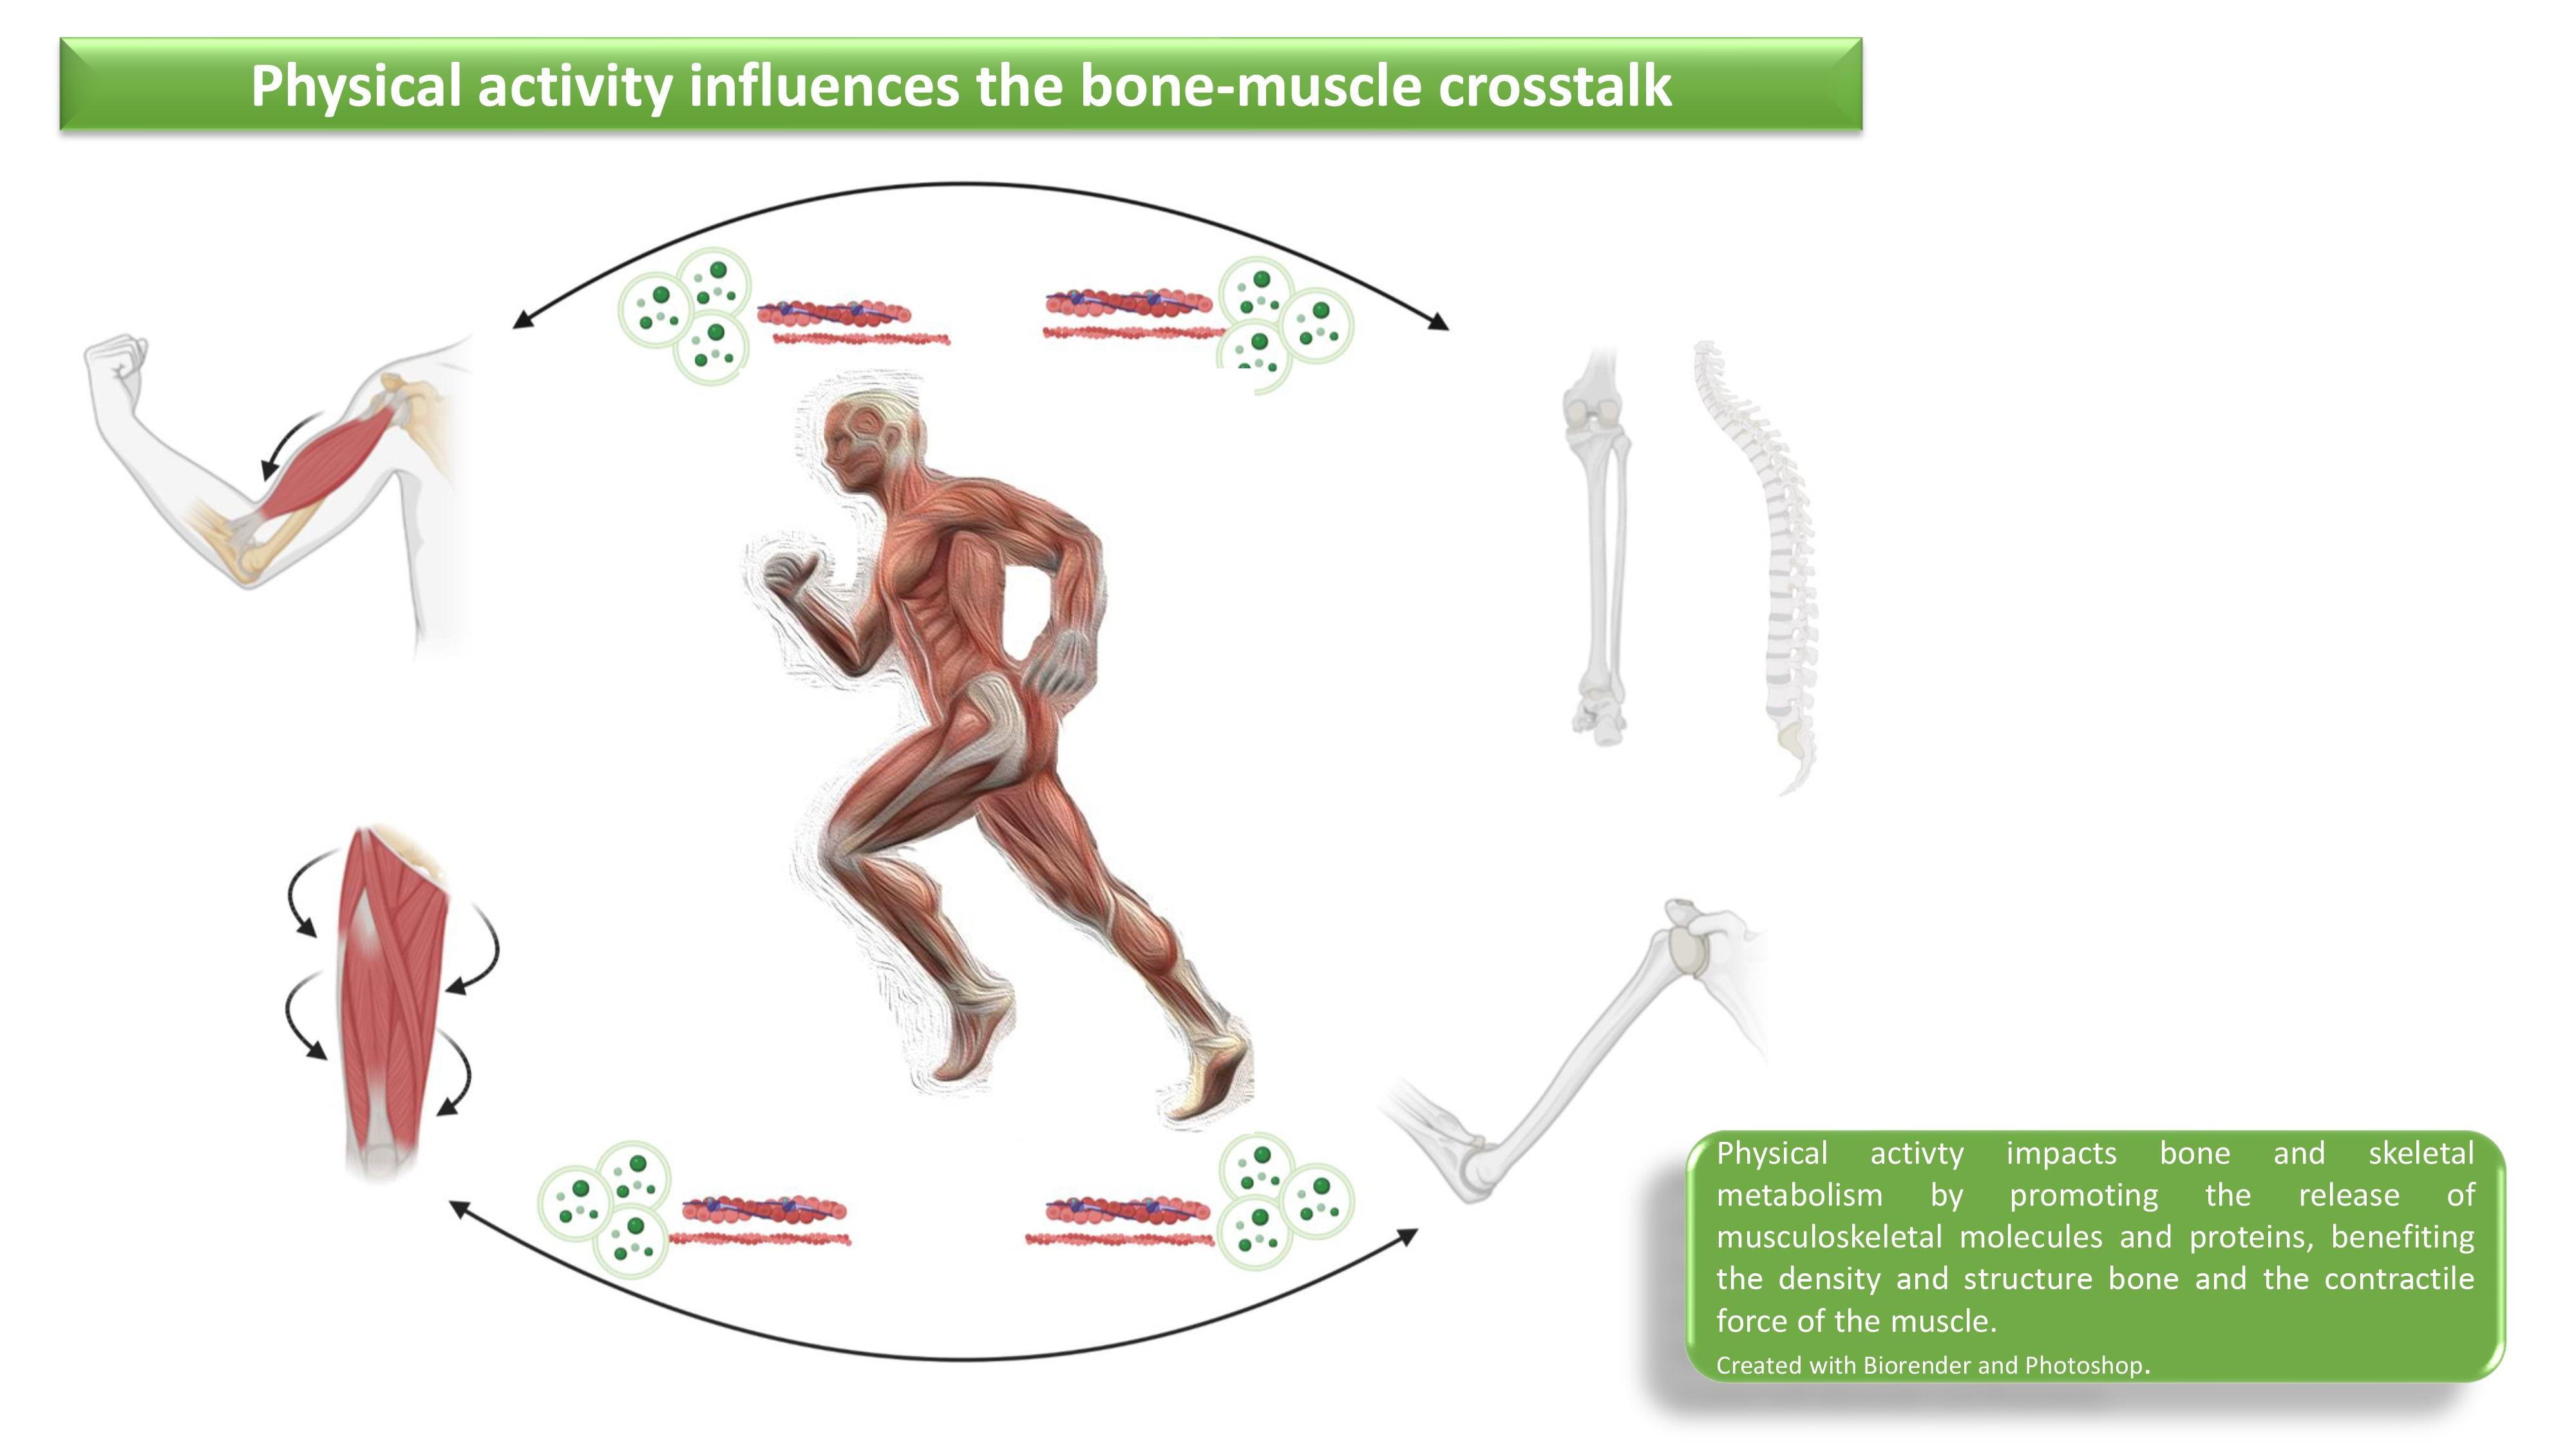 Cells Free Full-Text Crosstalk between Bone and Muscles during Physical Activity